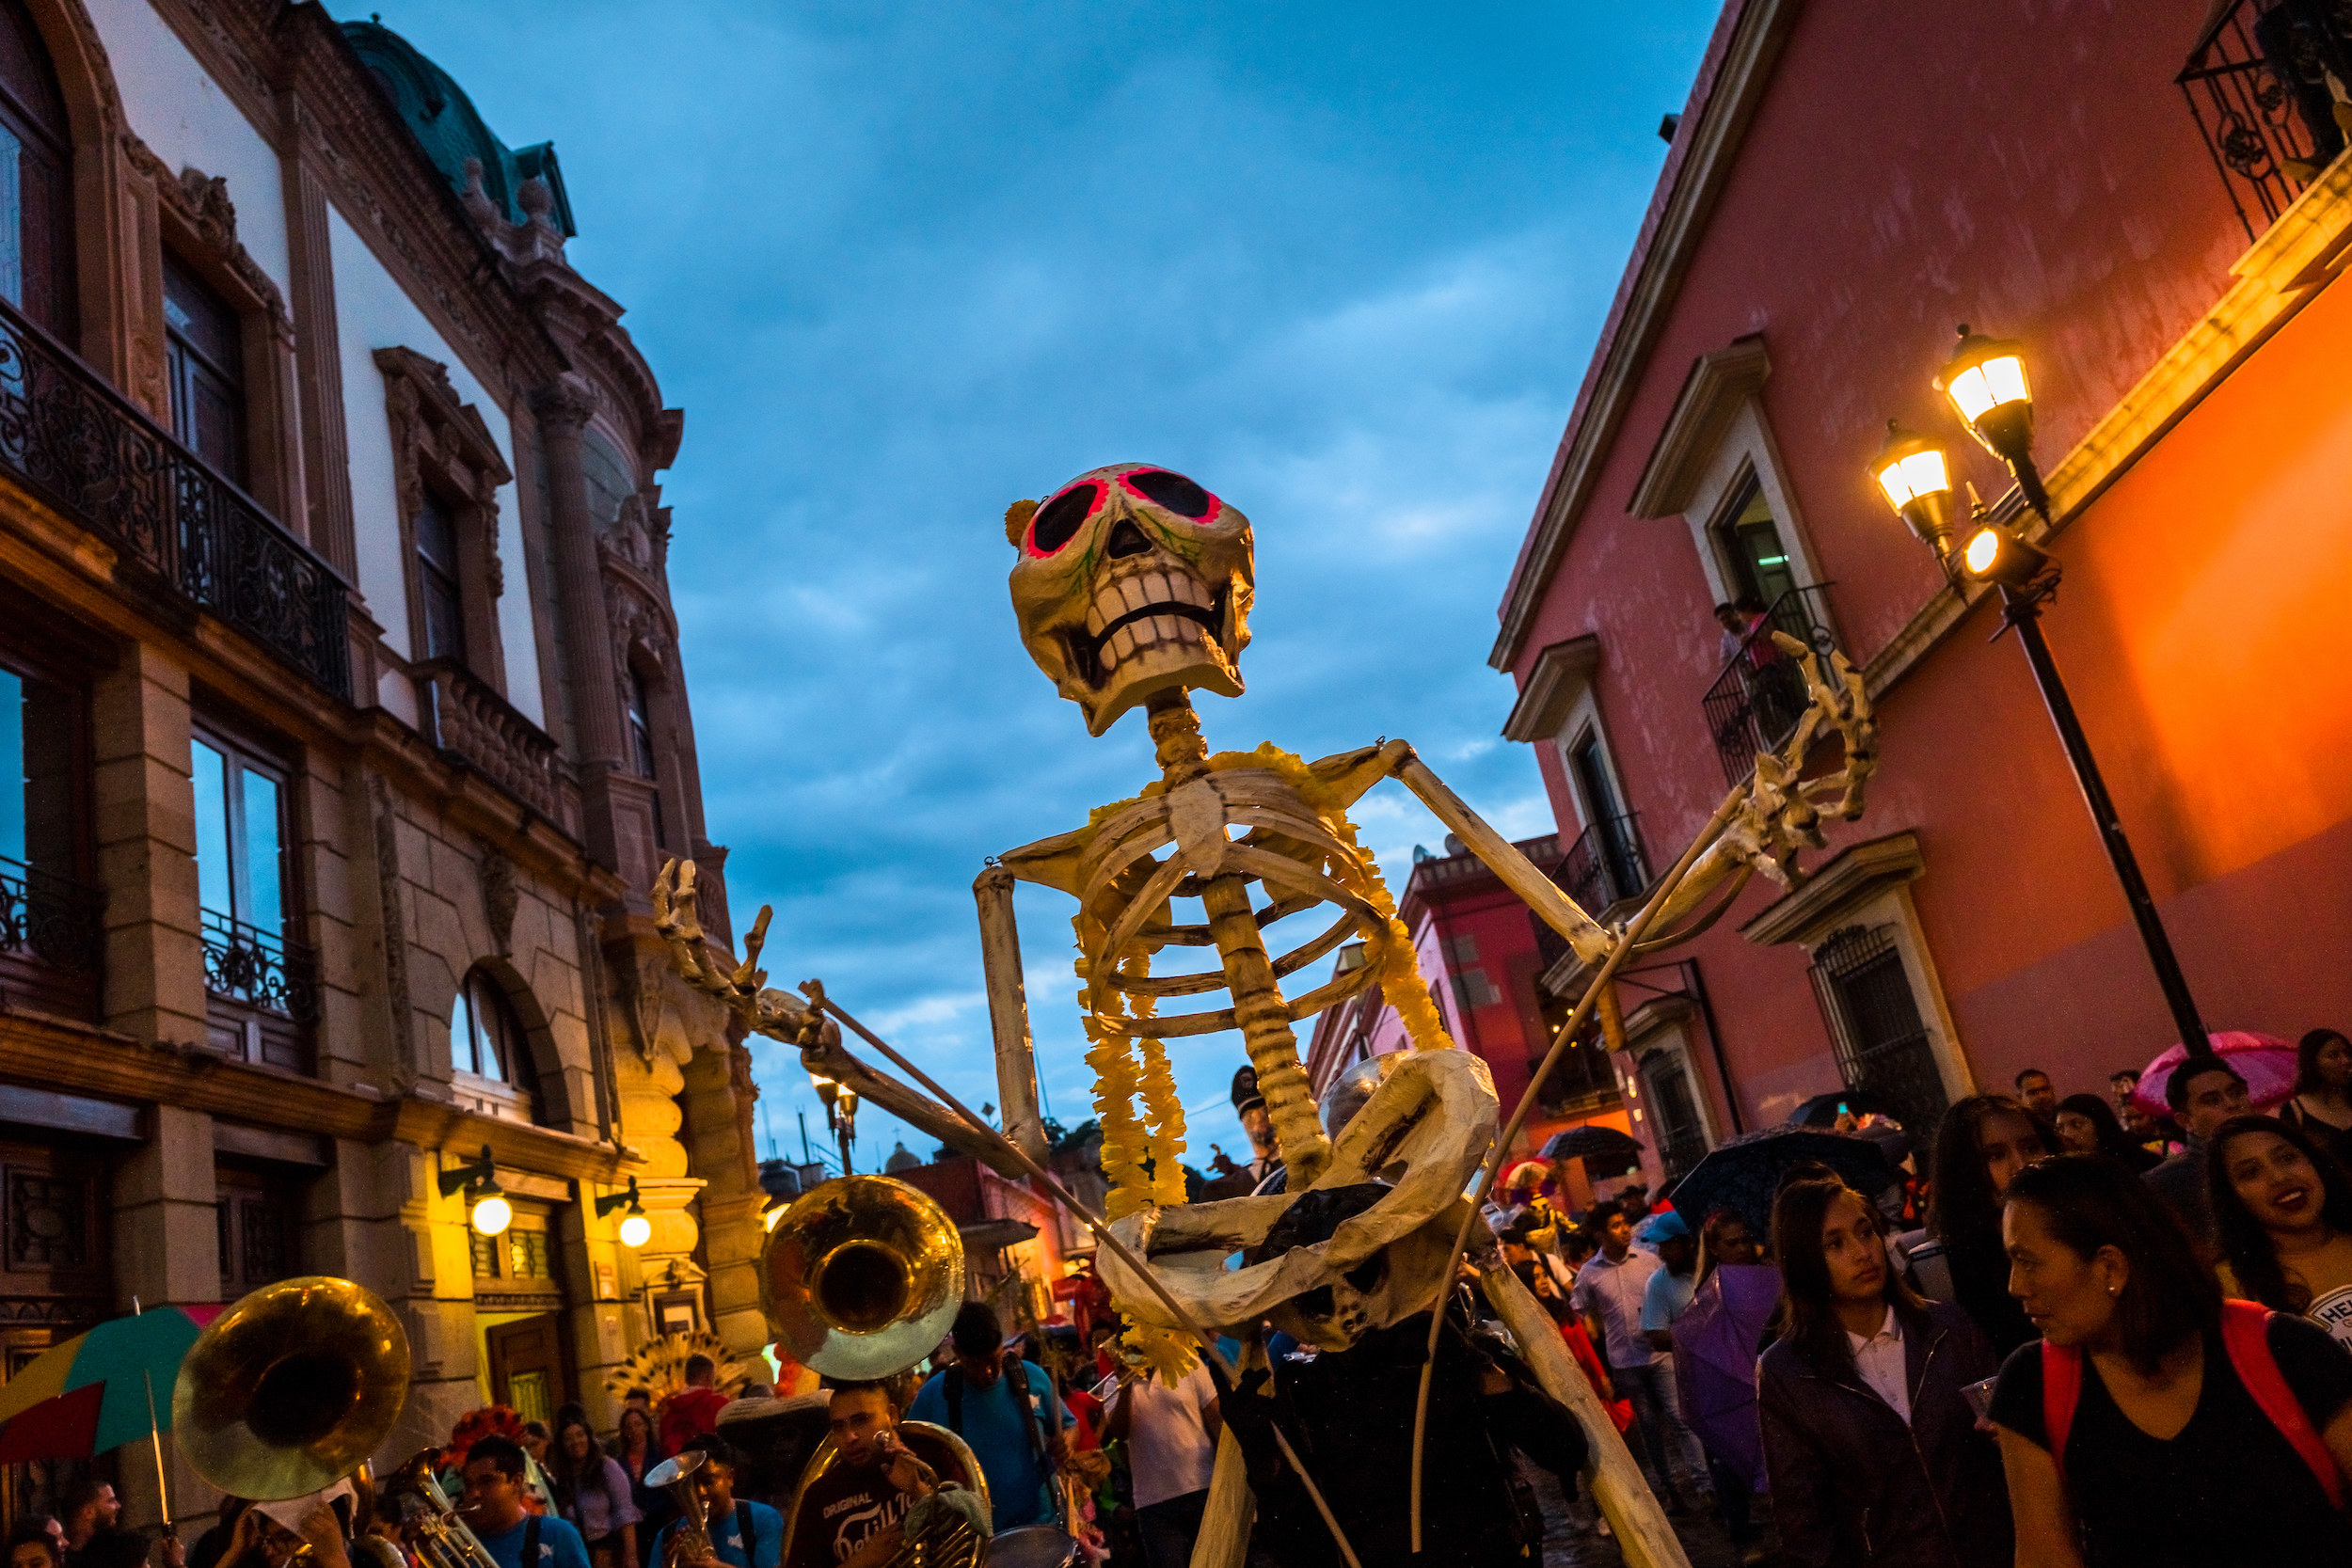 A large skeleton is elevated above the parade crowd